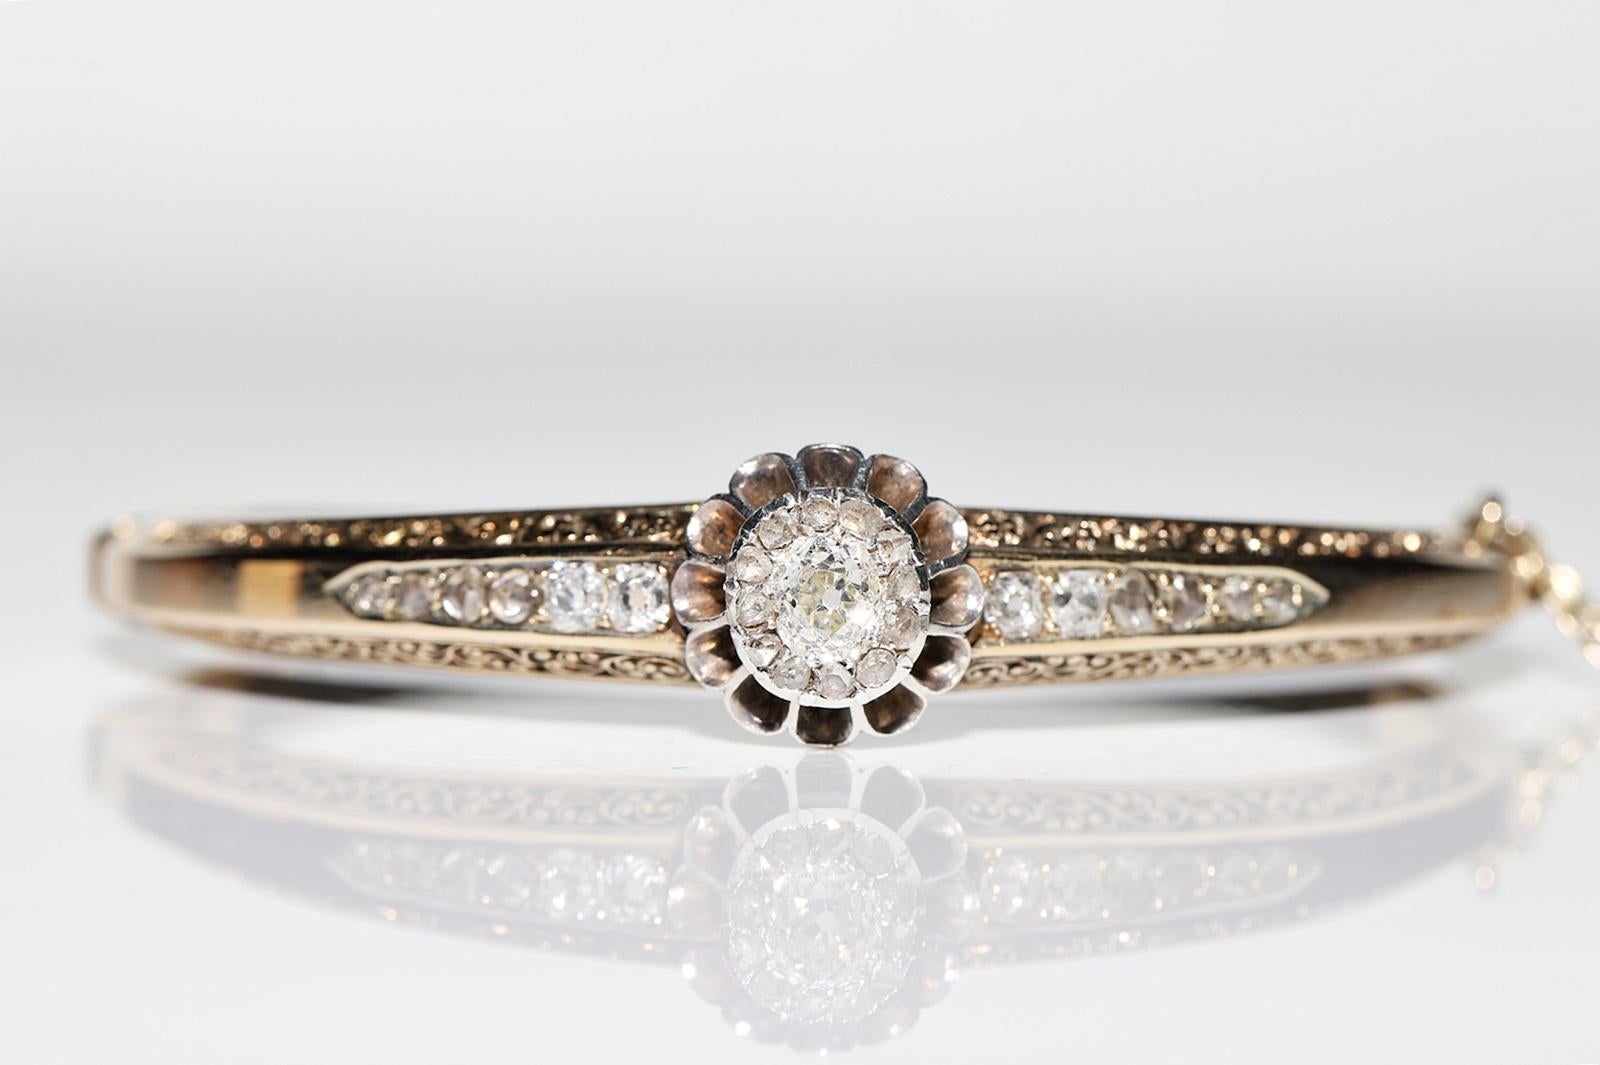 Late Victorian Antique Circa 1900s 14k Gold Natural Diamond Decorated Amazing Bangle bracelet For Sale